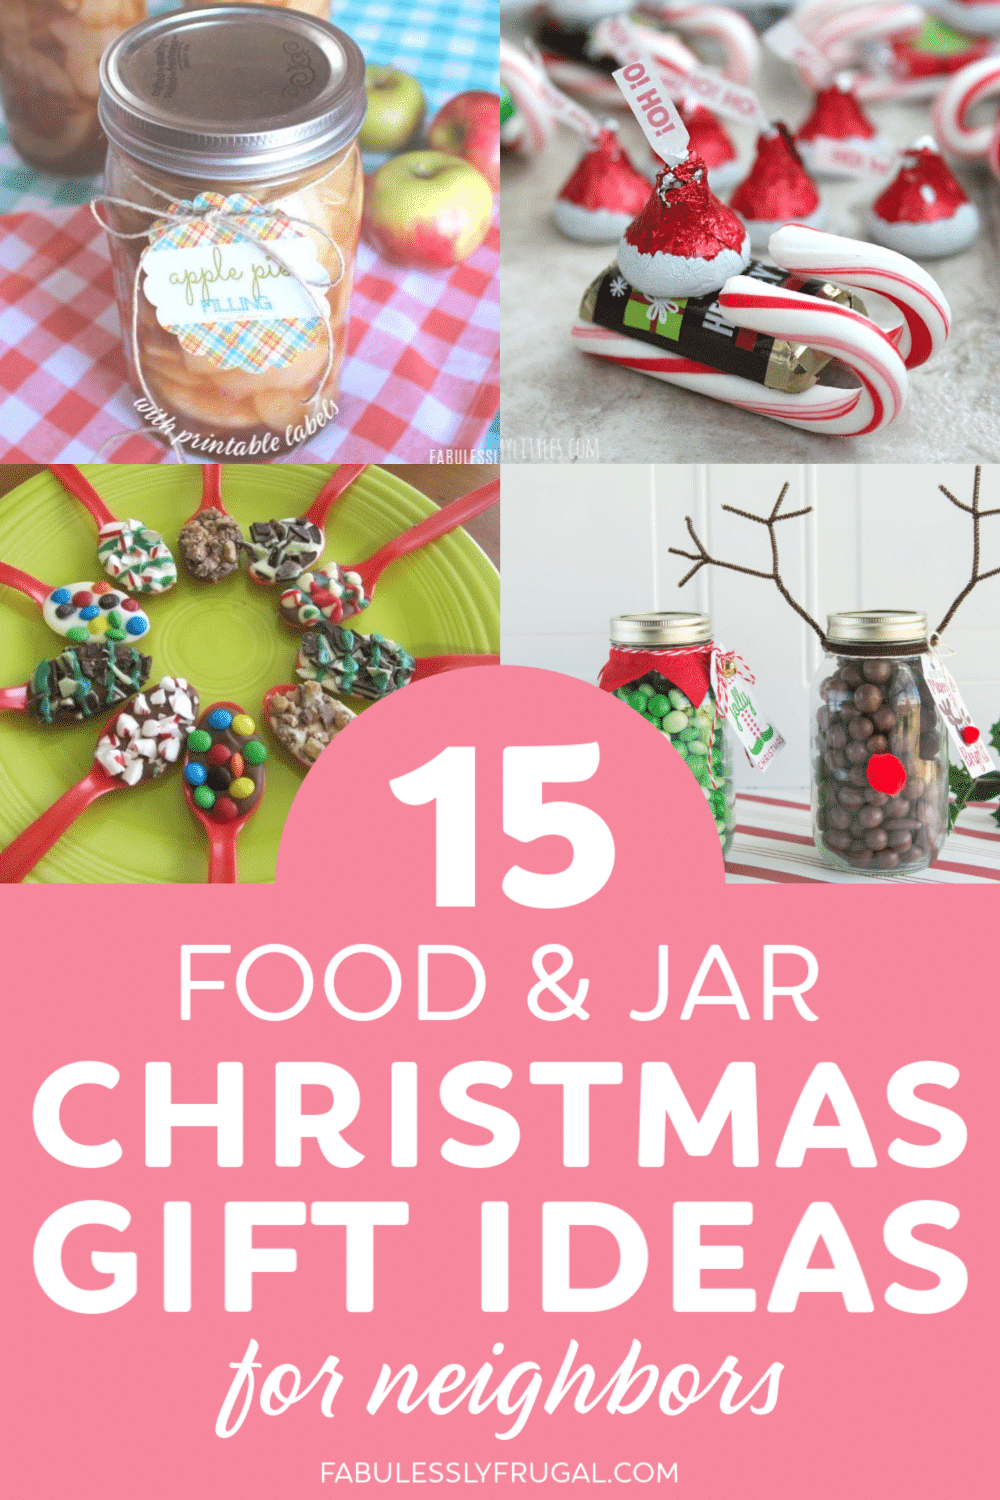 Food and jar gift ideas for neighbors